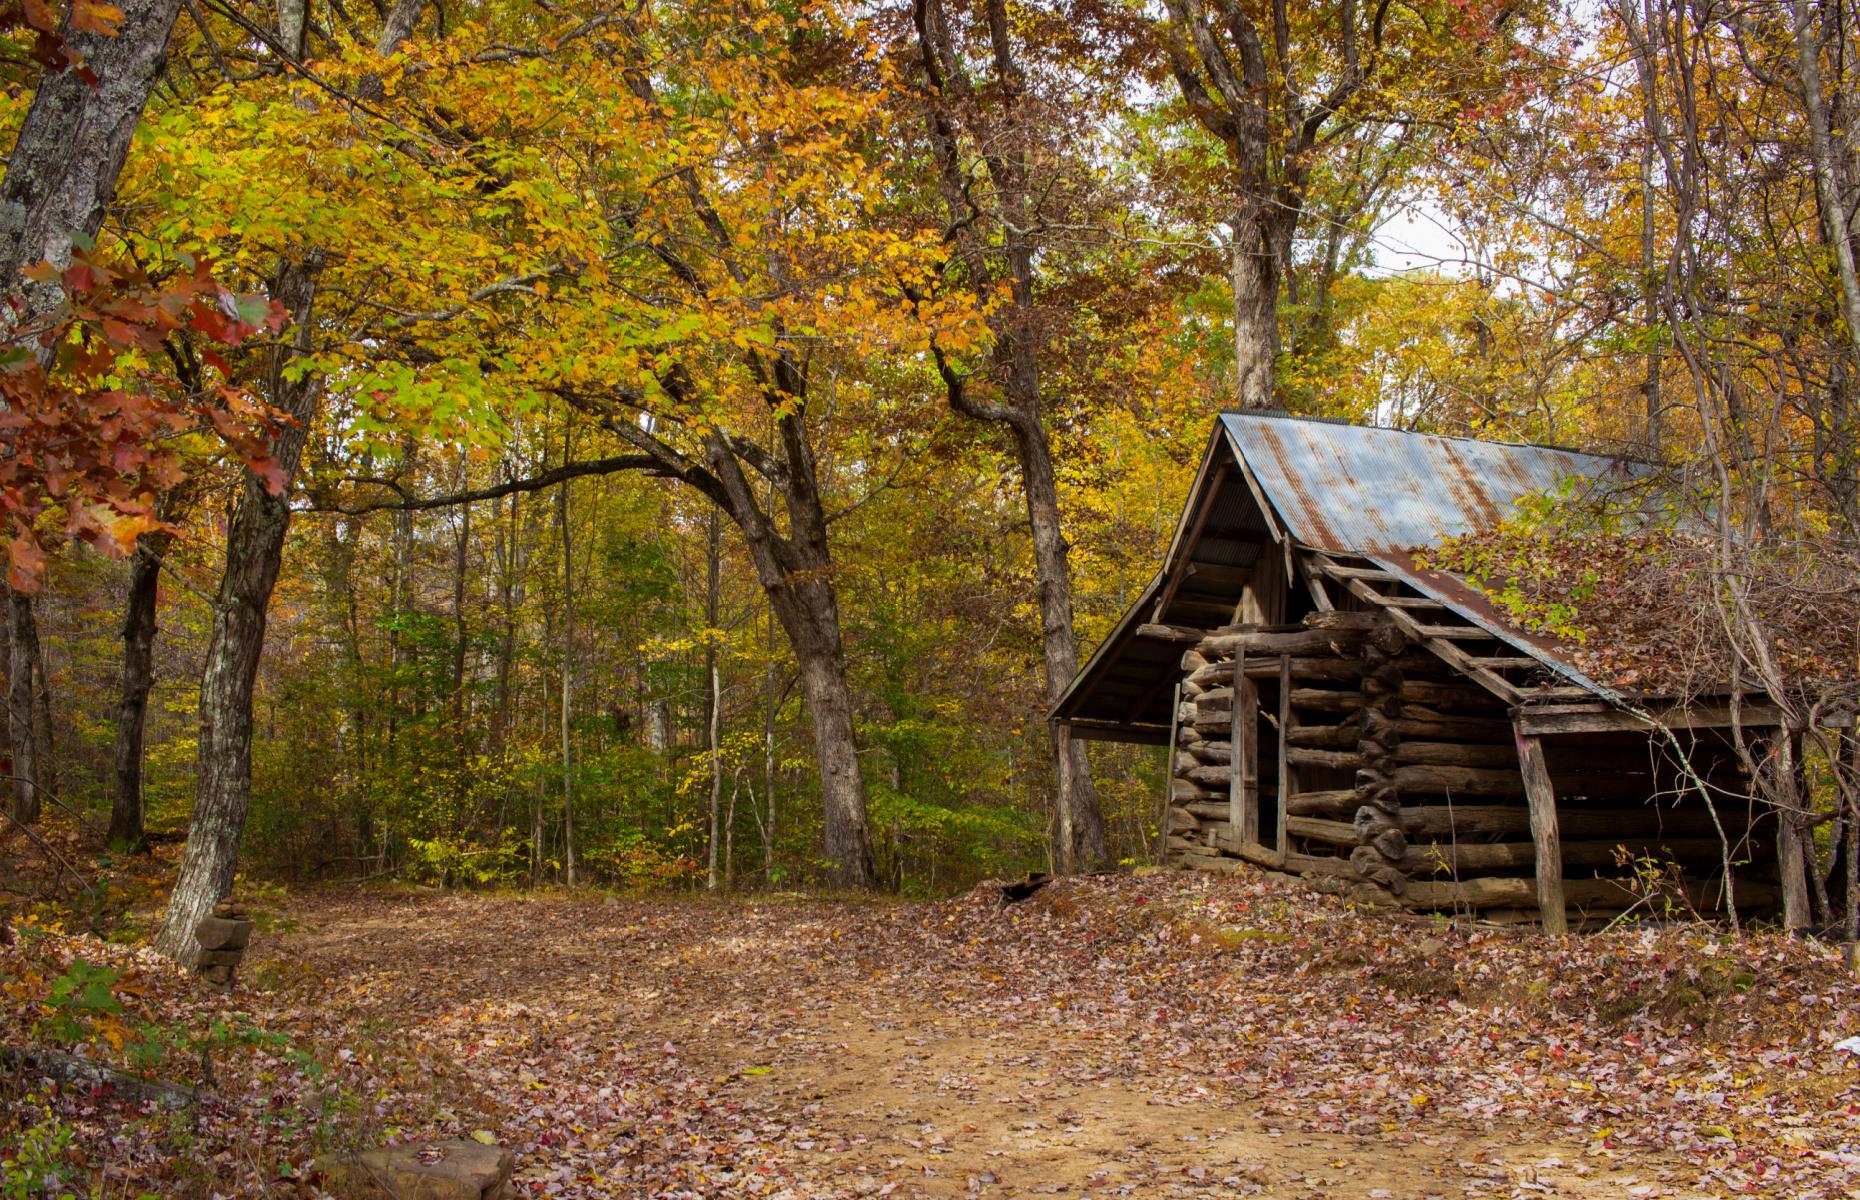 <p>Much like other parts of the rural United States, the Ozarks <a href="https://encyclopediaofarkansas.net/entries/ozark-english-5448/">have a history</a> of people speaking in a distinct dialect. It’s similar to the English spoken in the Appalachians and flourished in the late 1800s because of the relative isolation of the area. The original Ozark dialect is said to be heavily influenced by Elizabethan English, but the speech patterns have long been diluted as people from the area have mixed with visitors and traveled themselves.</p>